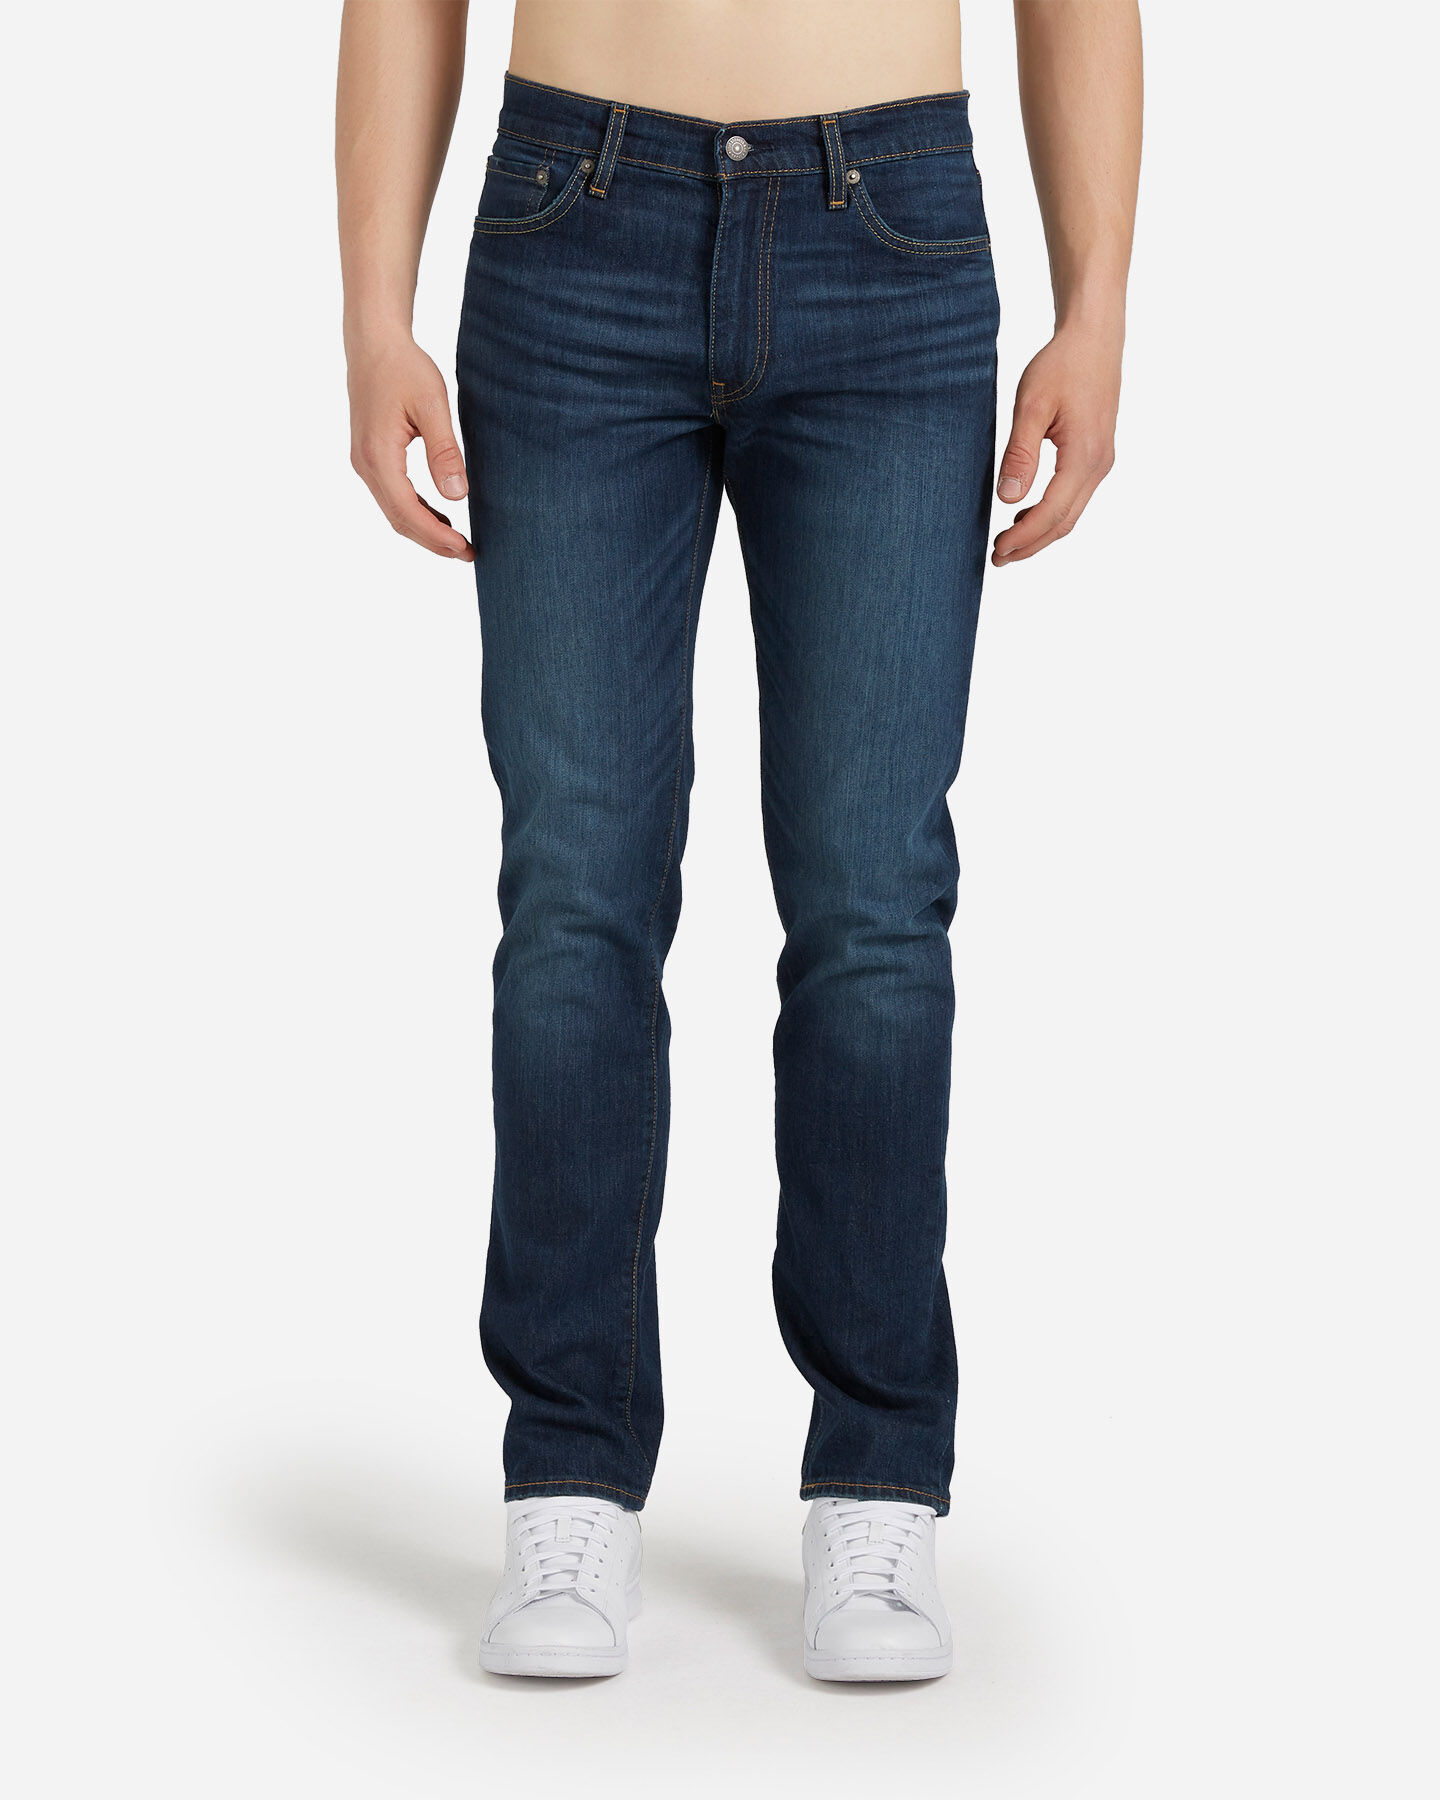  Jeans LEVI'S 511 SLIM FIT  M S4087712 scatto 0